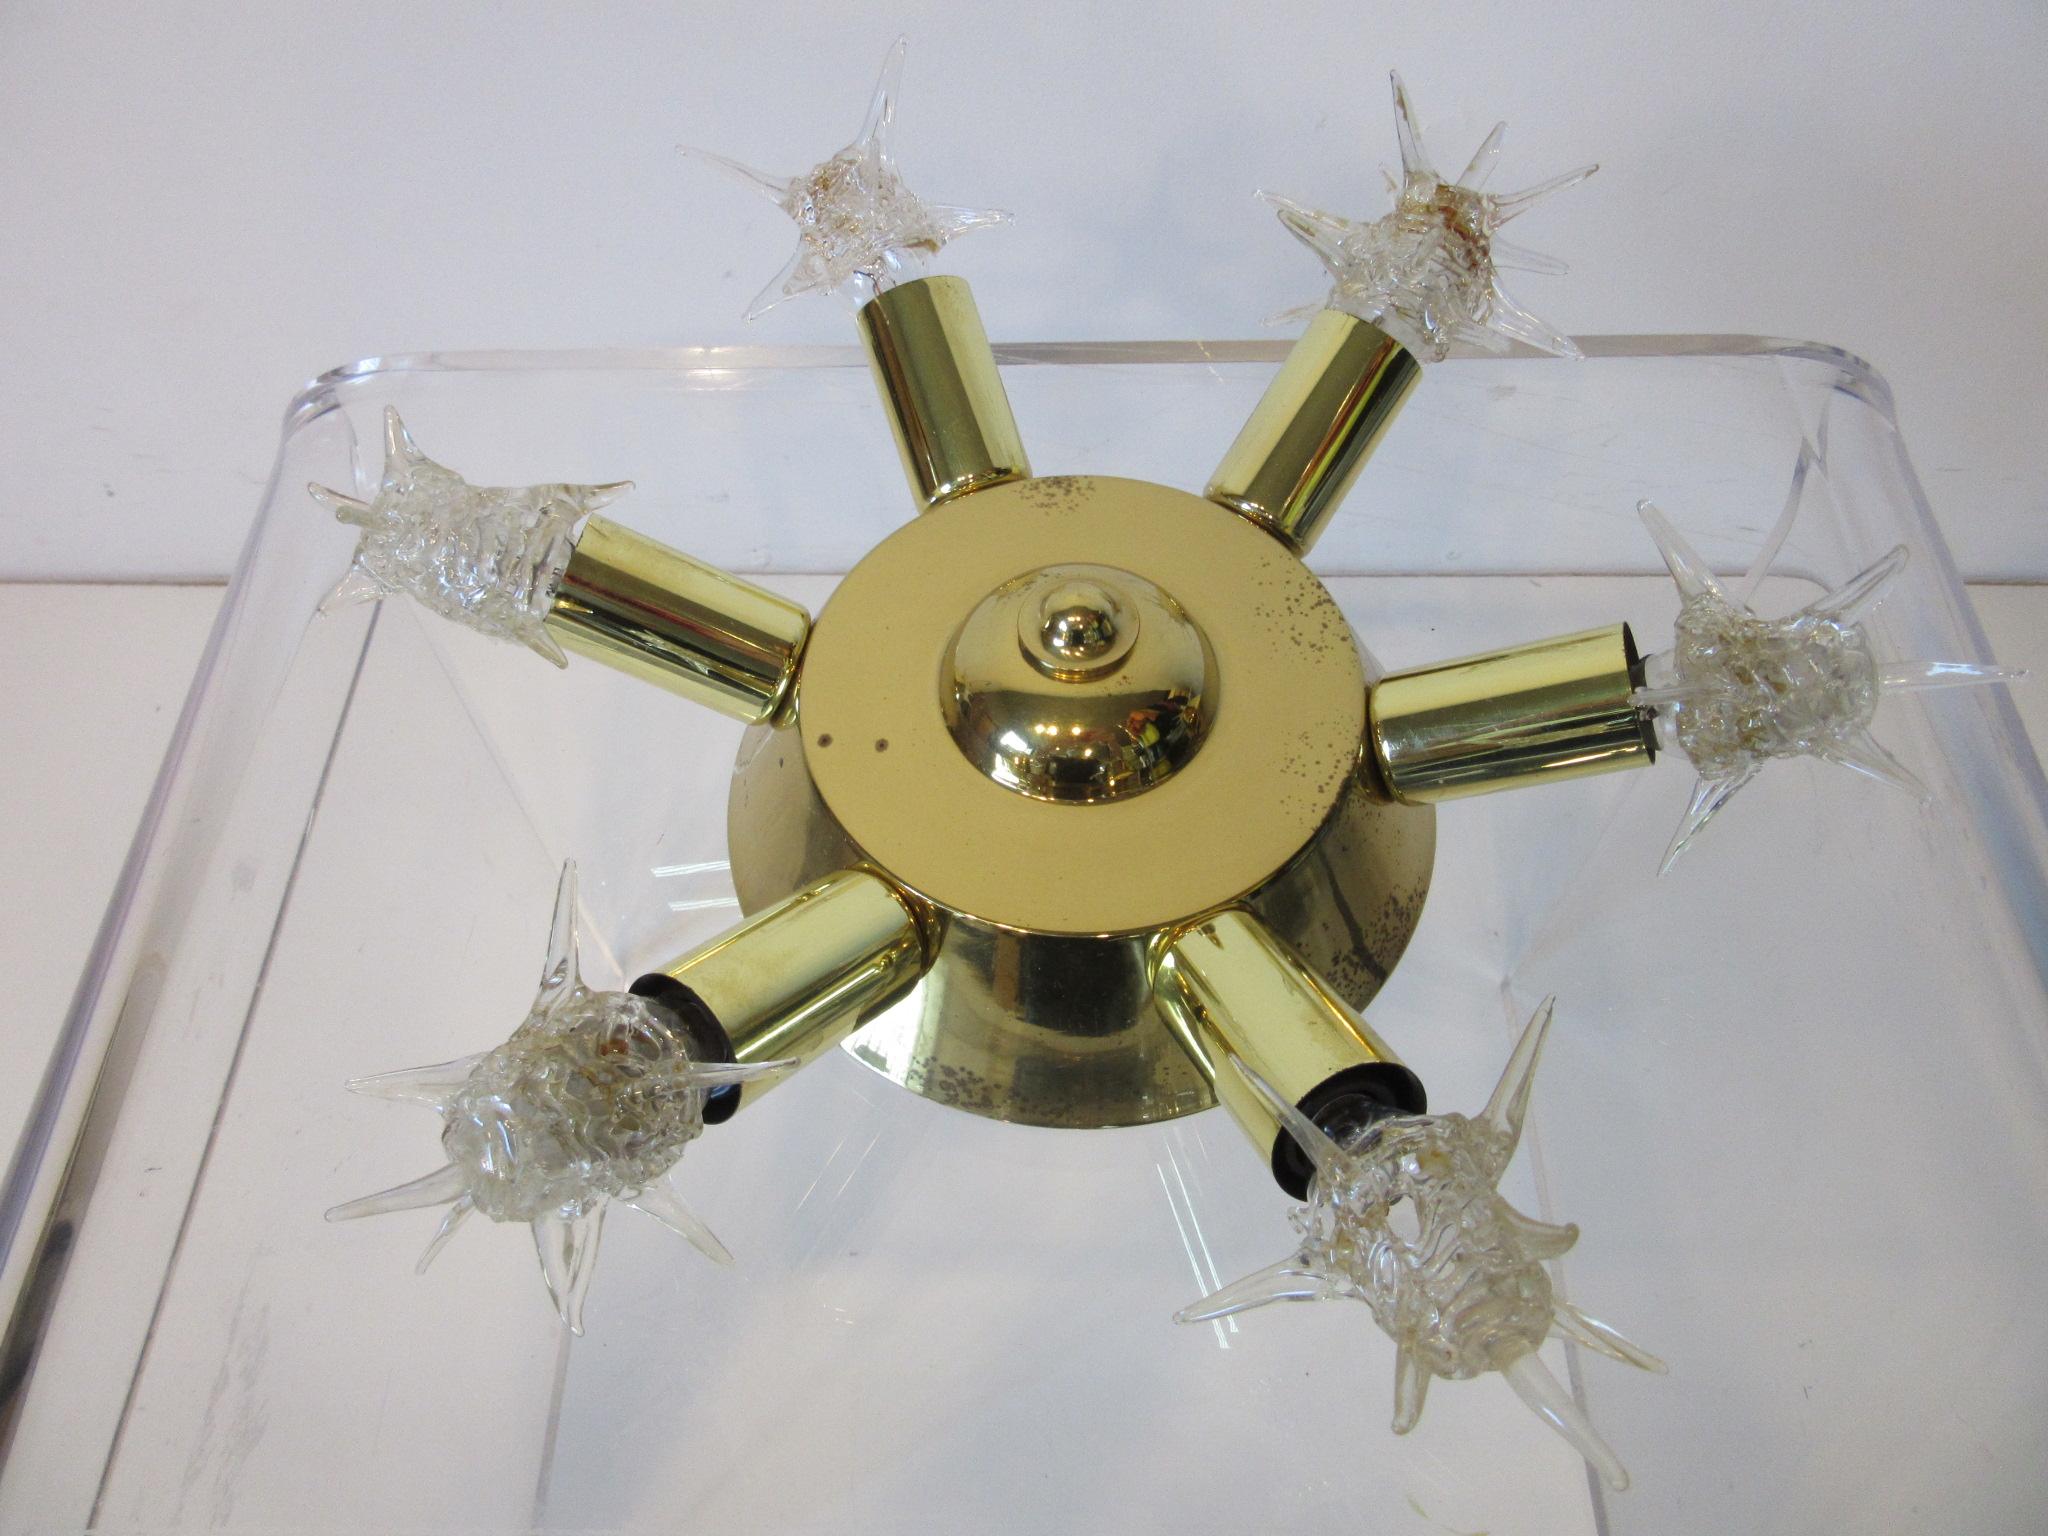 A brass Atomic Starburst ceiling fixture with six radiating arms having the starlight bulbs which can still be ordered. This was meant to be used on the ceiling and wires right into the ceiling box, unlike the hanging Atomic chandelier these were